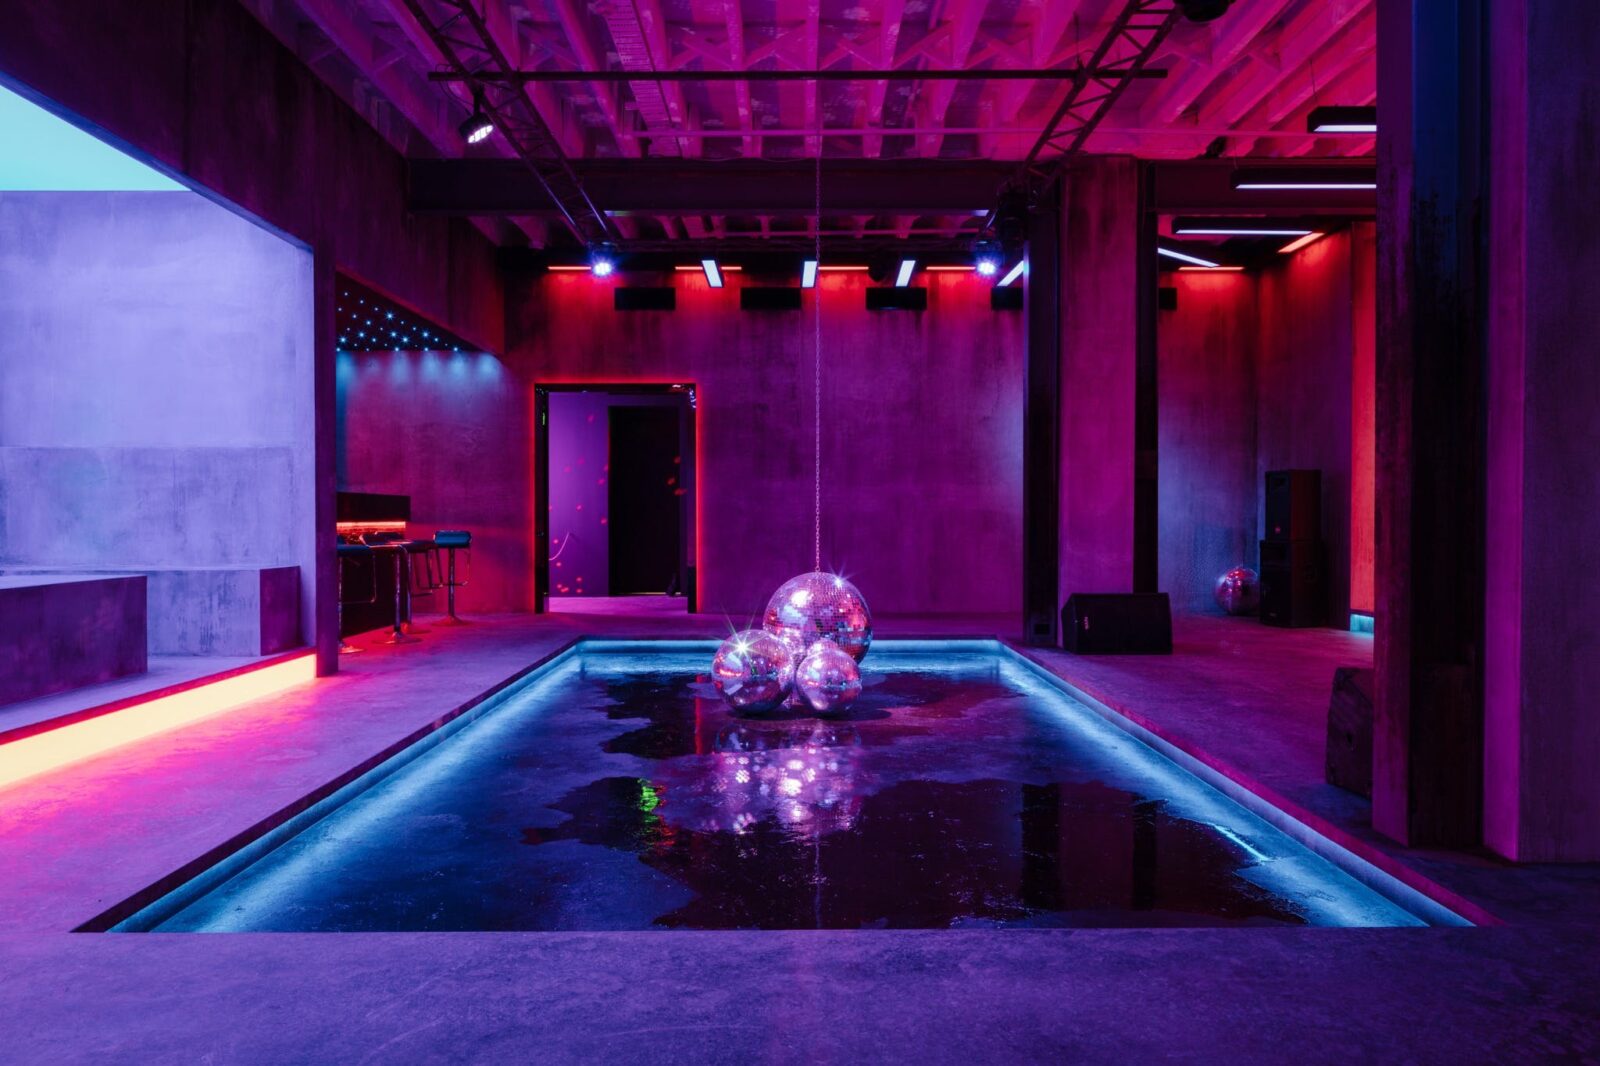 An artwork installation of a dancehall with neon club lighting and disco balls on the floor